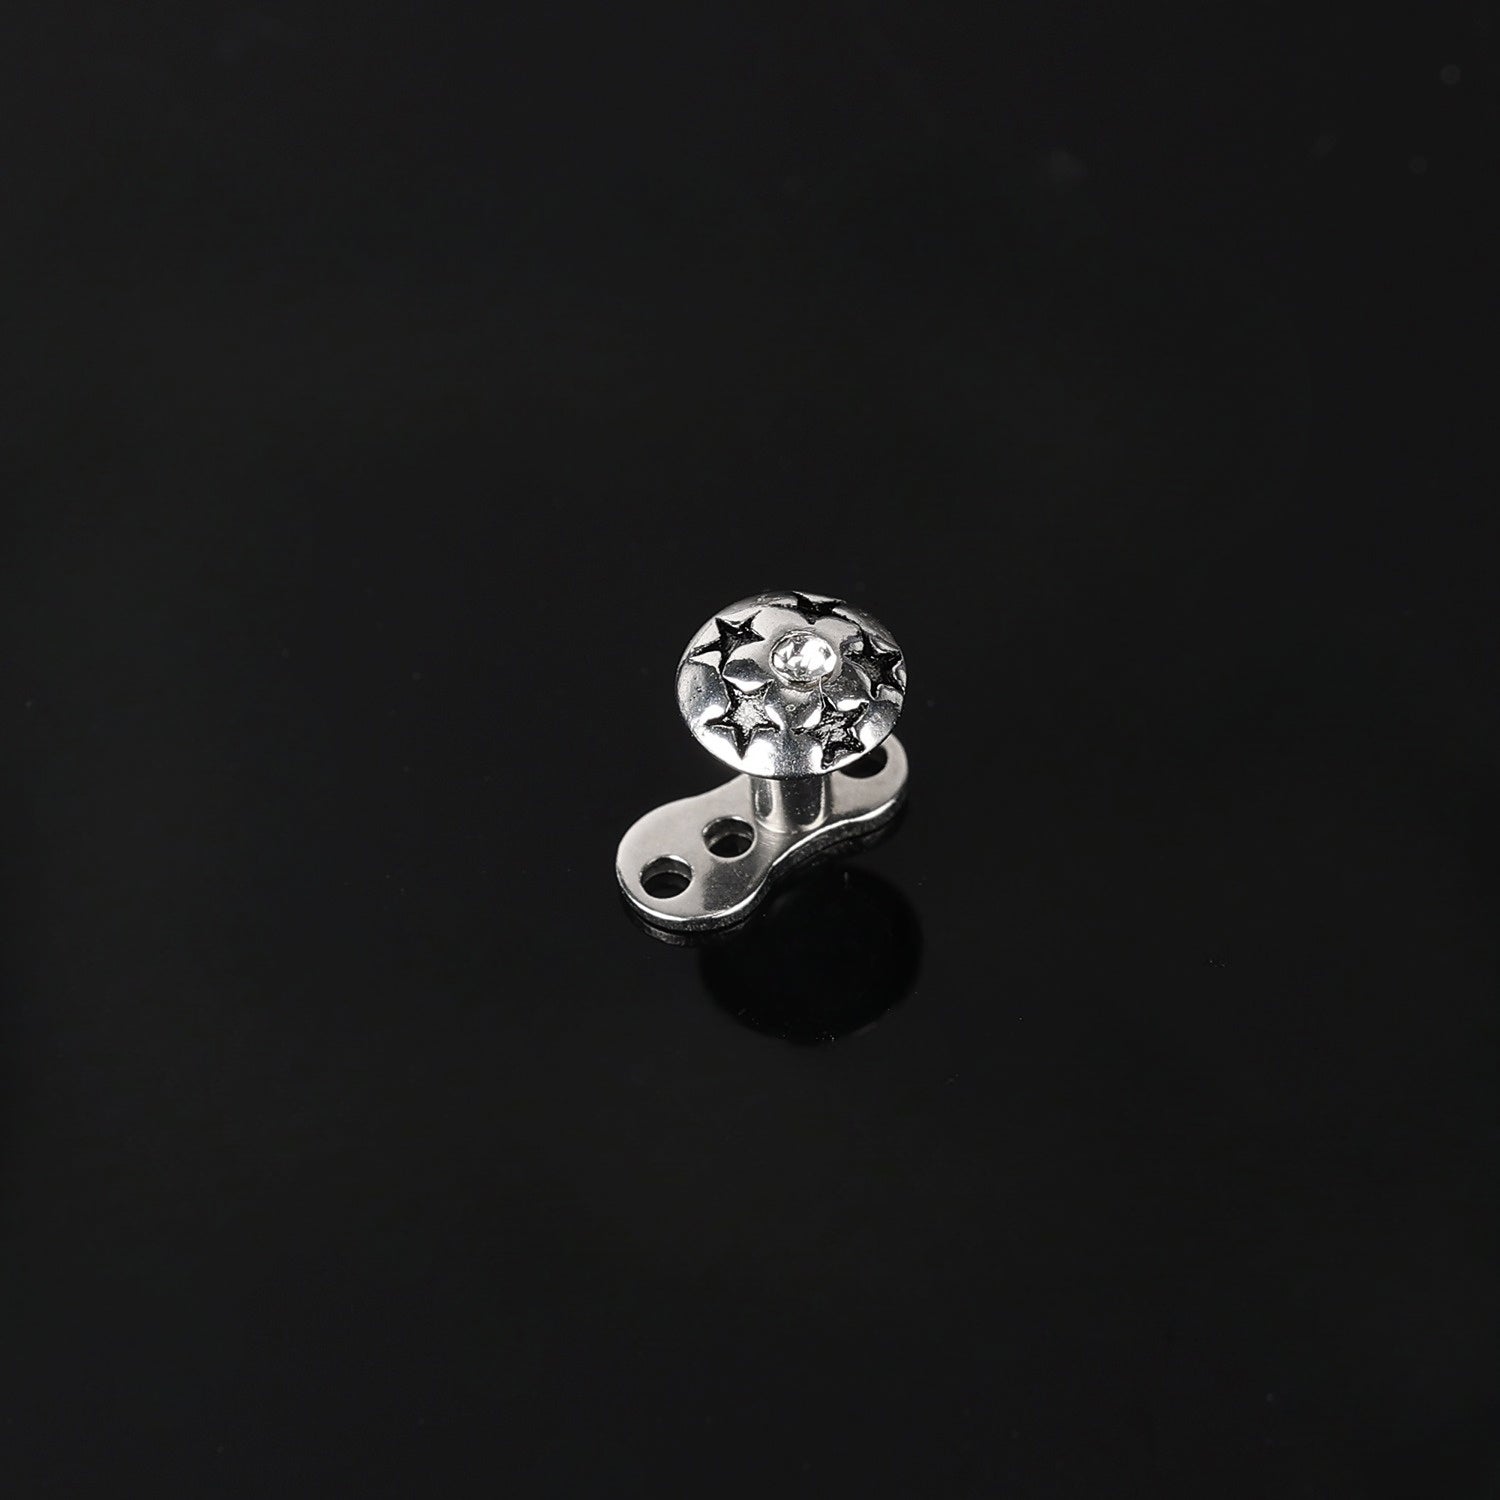 16G Zircon Dermal Anchor Tops and Base Surgical Steel Internally Threaded Skin Diver Piercings